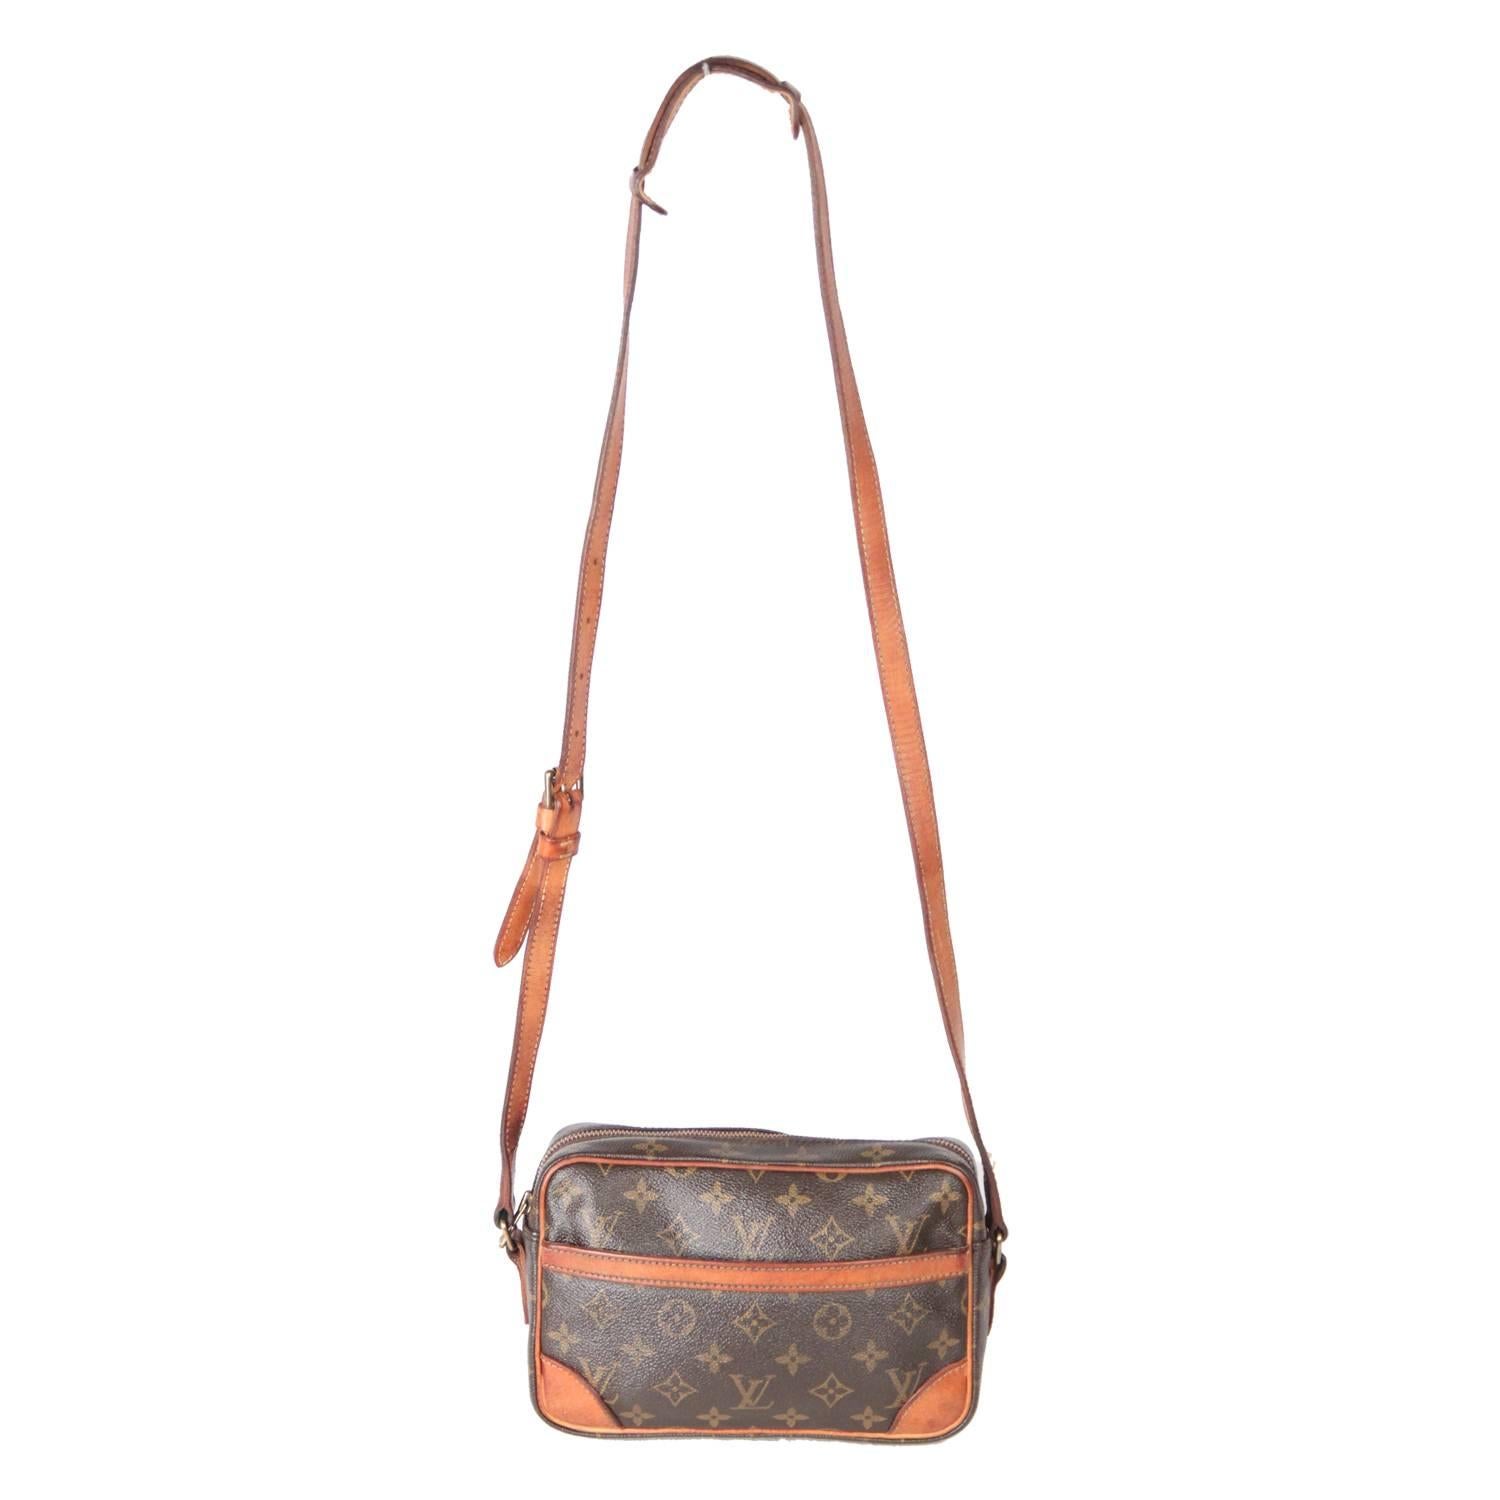 LOUIS VUITTON 'Trocadero 24' Messenger bag. Designed with timeless LV monogram canvas and accented with tan leather and gold-tone hardware.Zipper top closure. Features adjustable shoulder strap, an open pocket on the exterior front, cross-grain